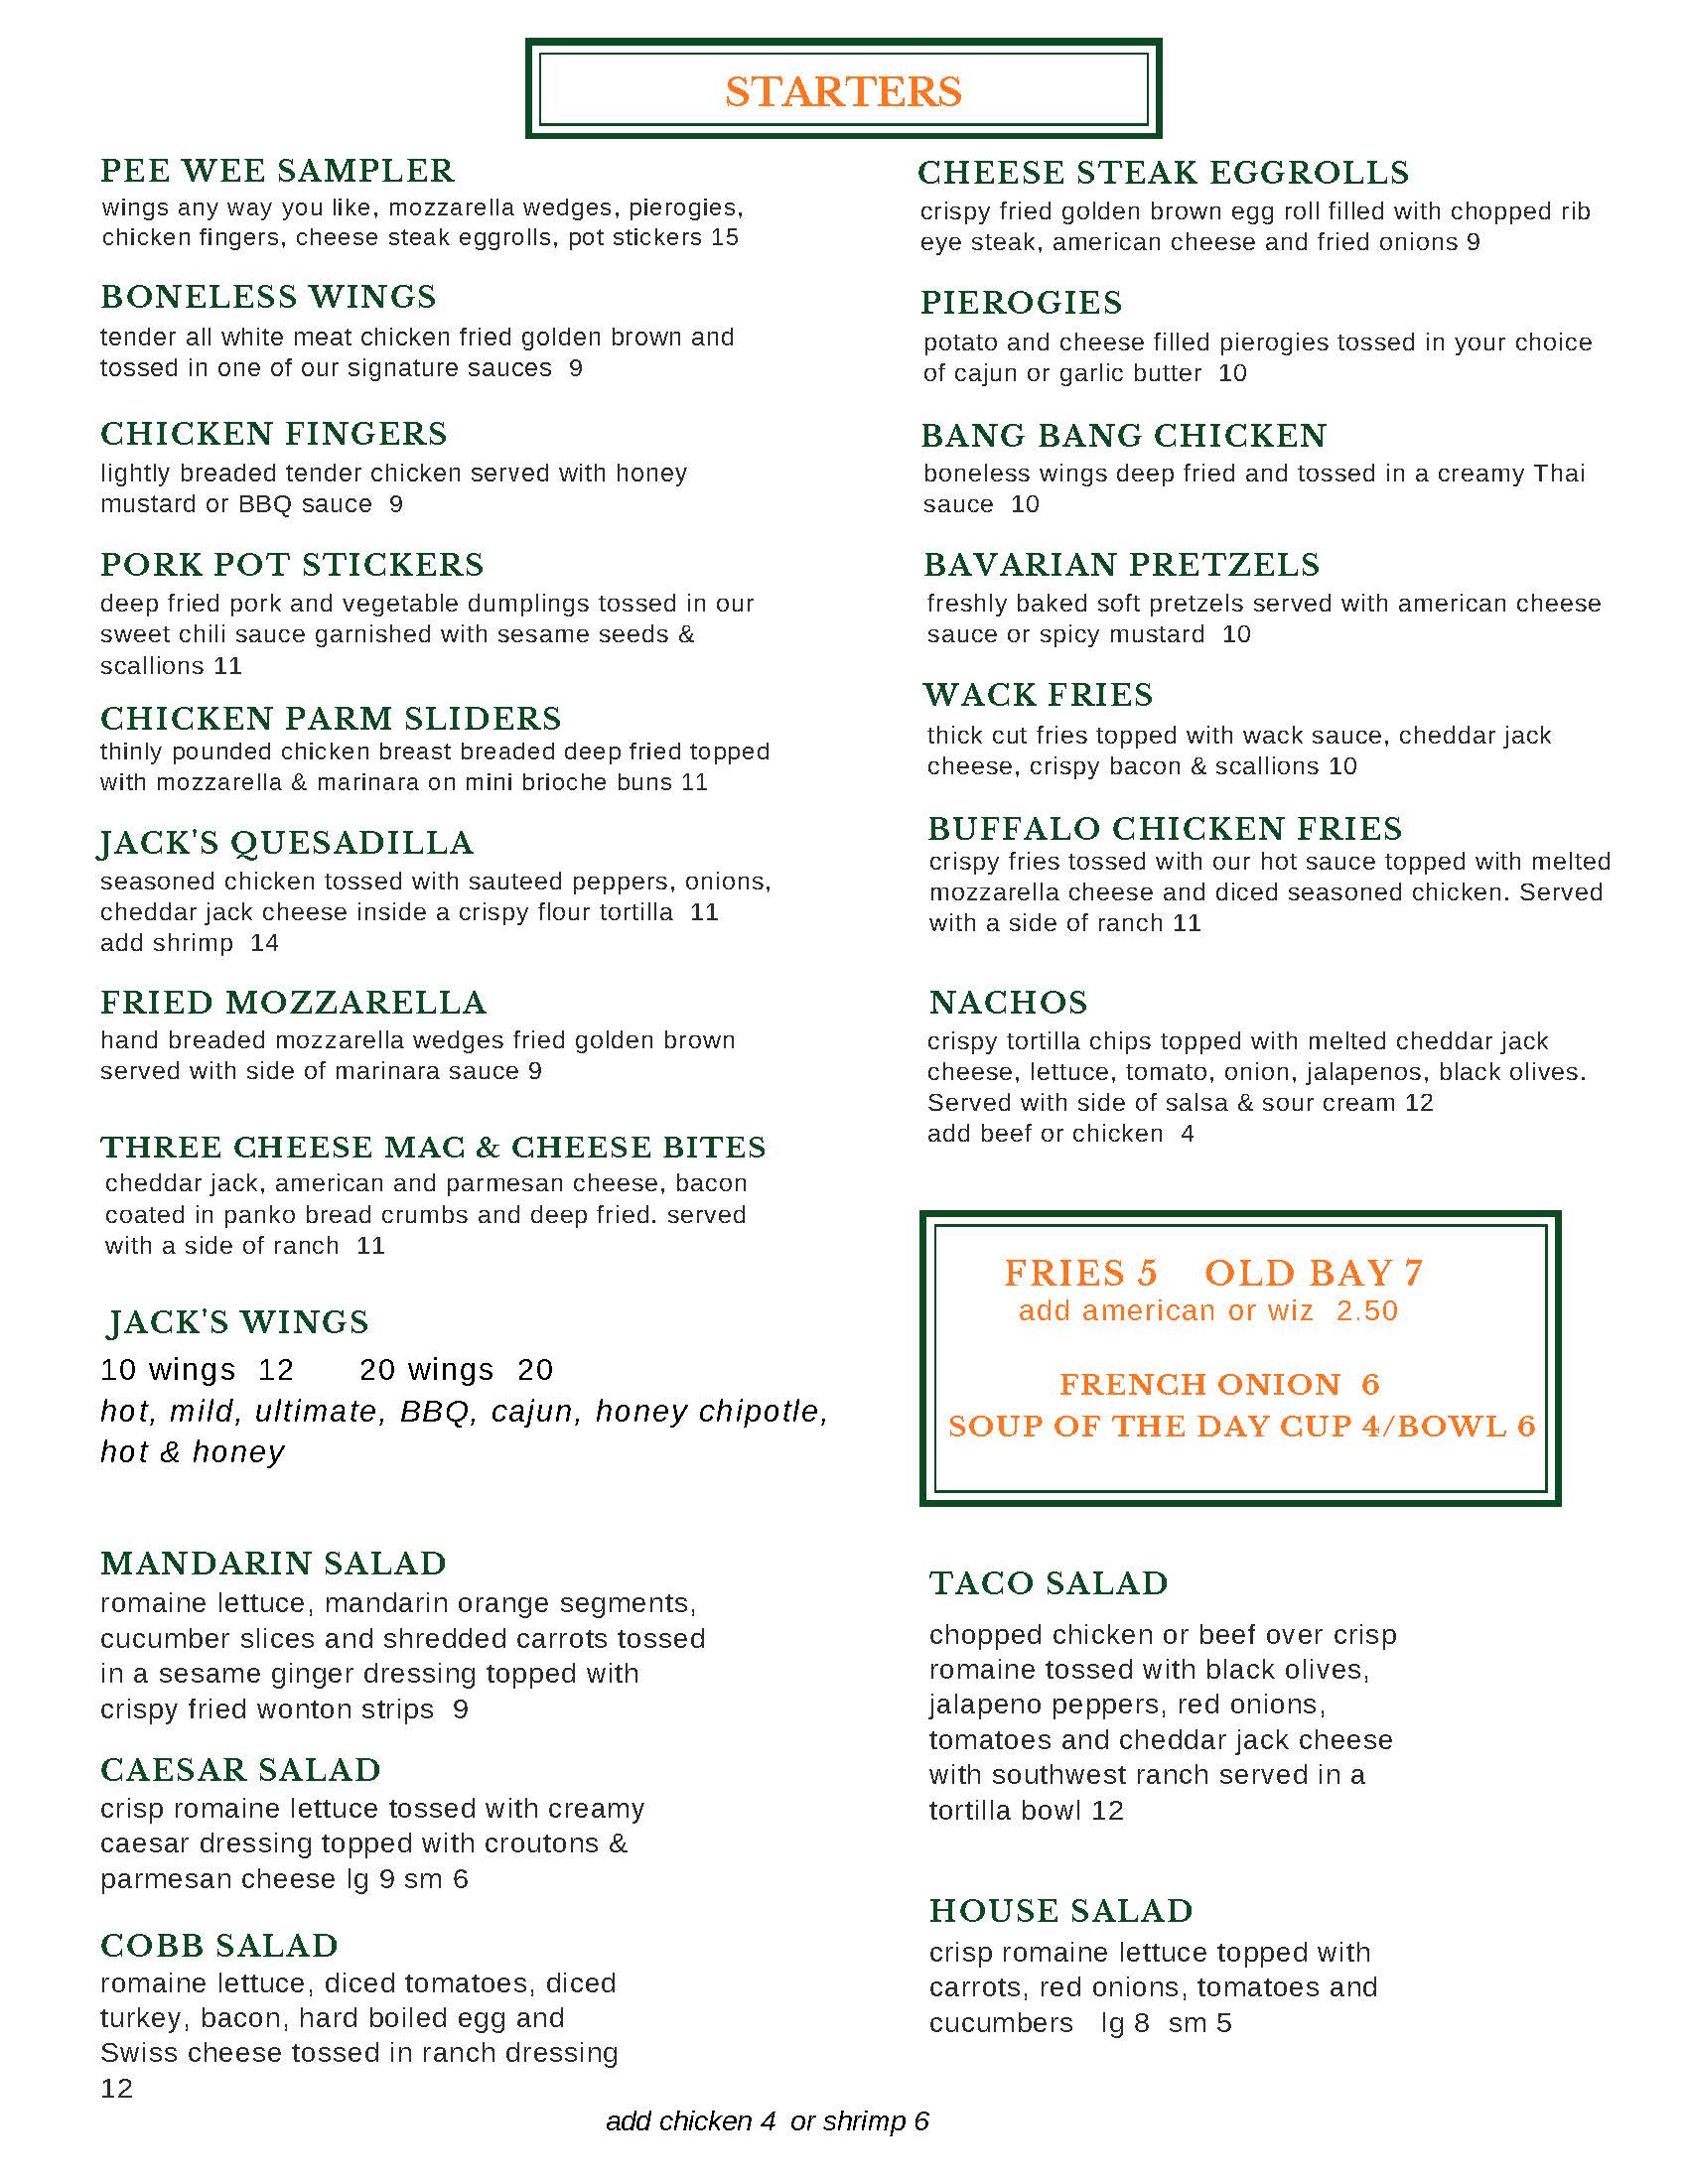 A menu for a restaurant with green and white colors.